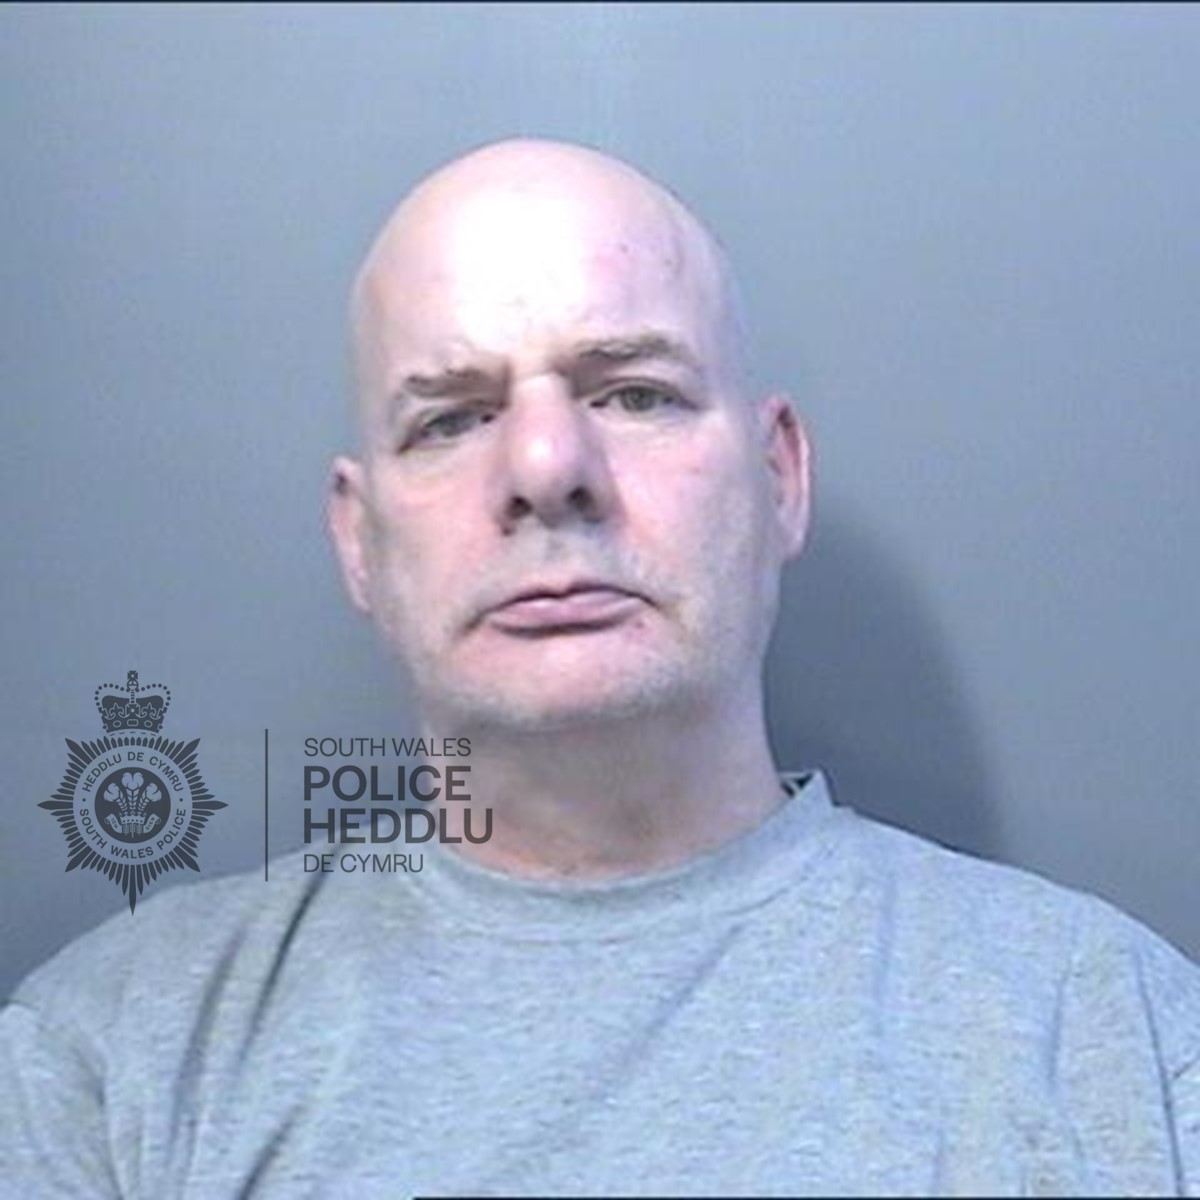 57-year-old man sentenced to 14 years in prison for attempted murder after a woman was stabbed in her home in Swansea city centre